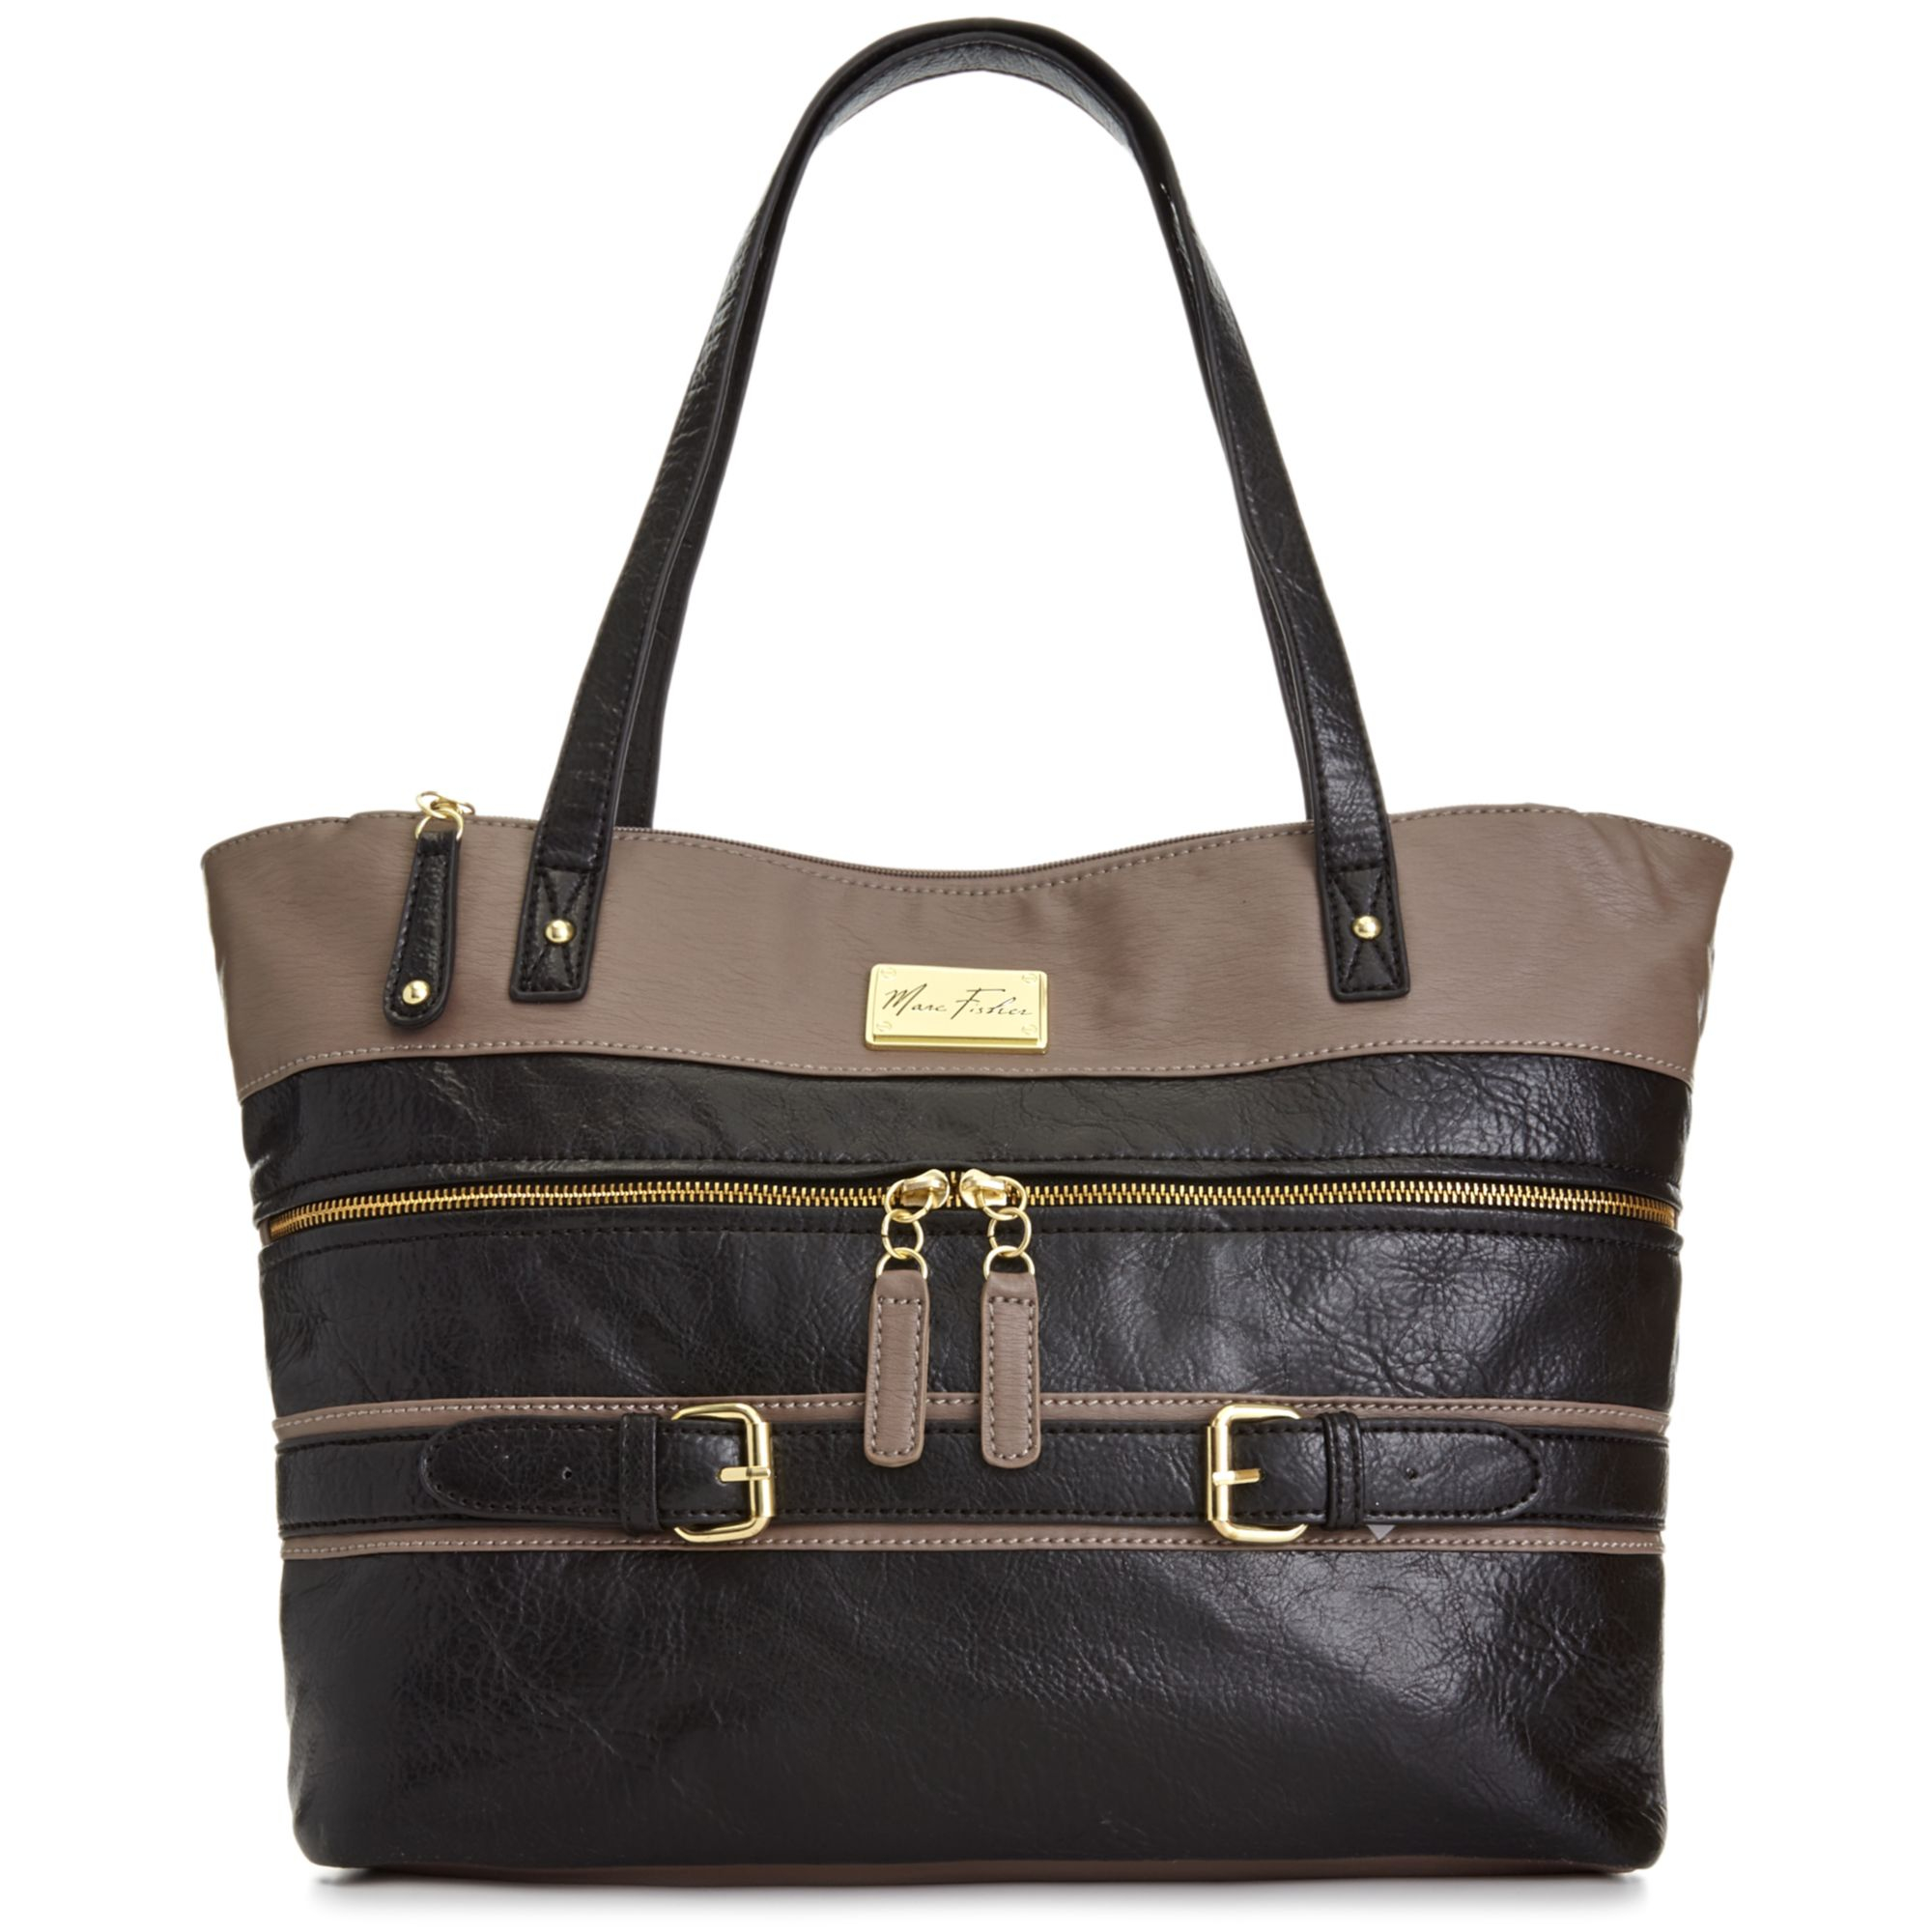 Marc Fisher totes in Gray (BLACK/TAUPE) | Lyst